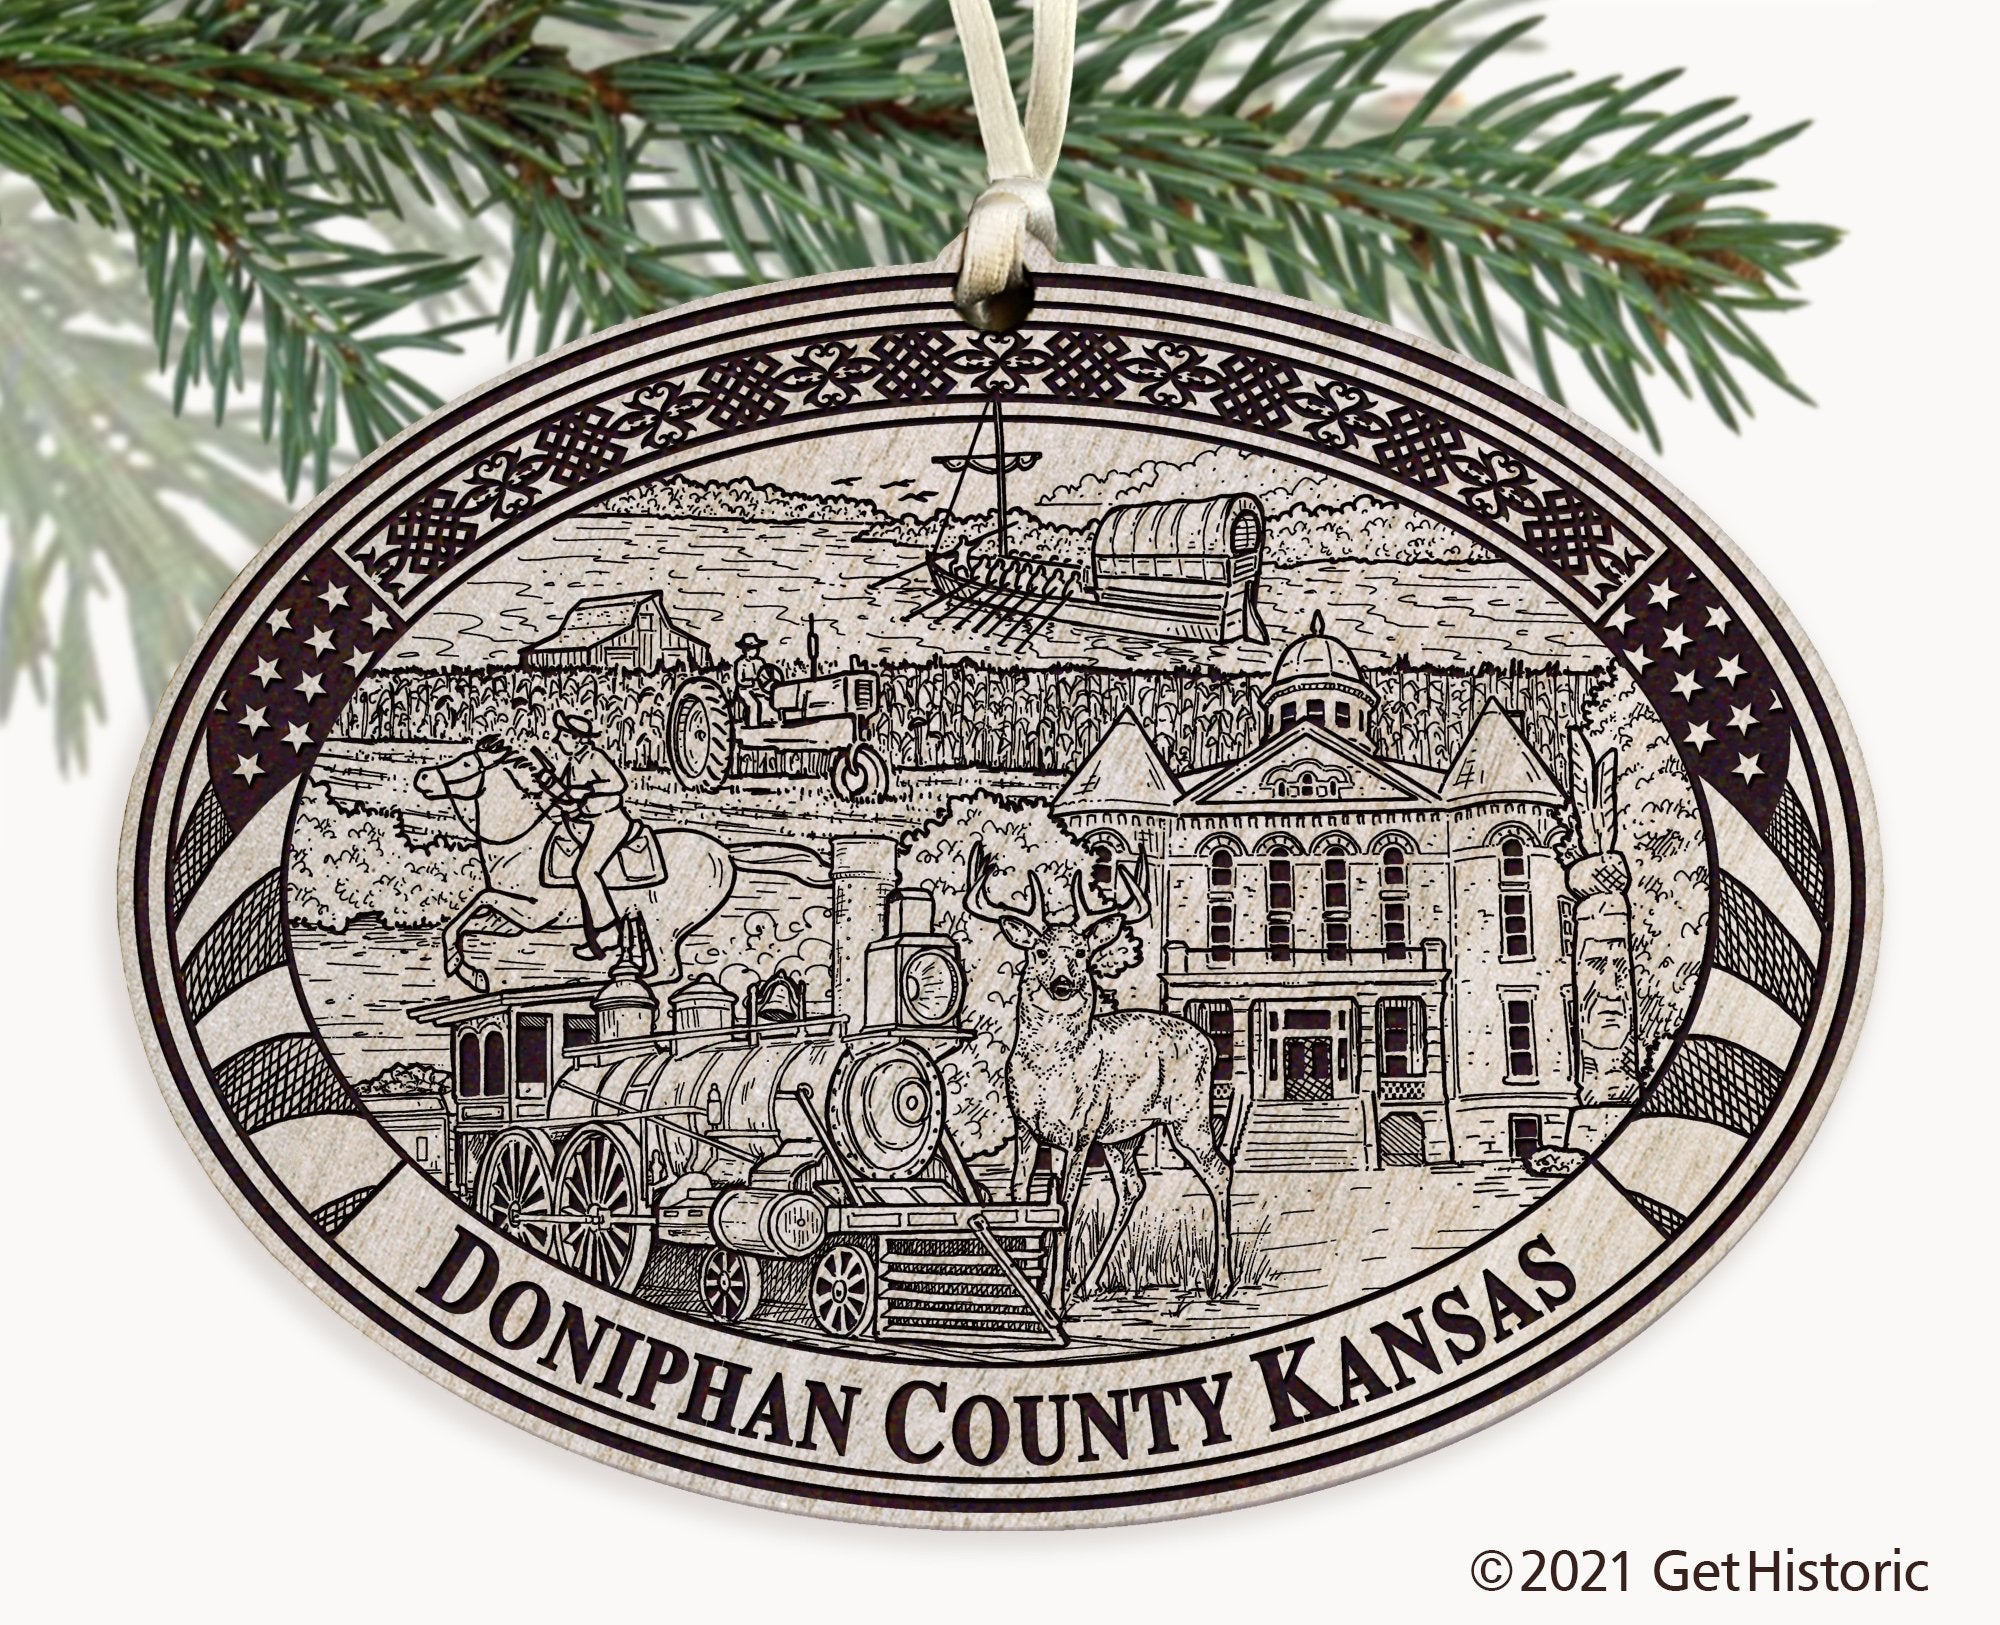 Doniphan County Kansas Engraved Ornament